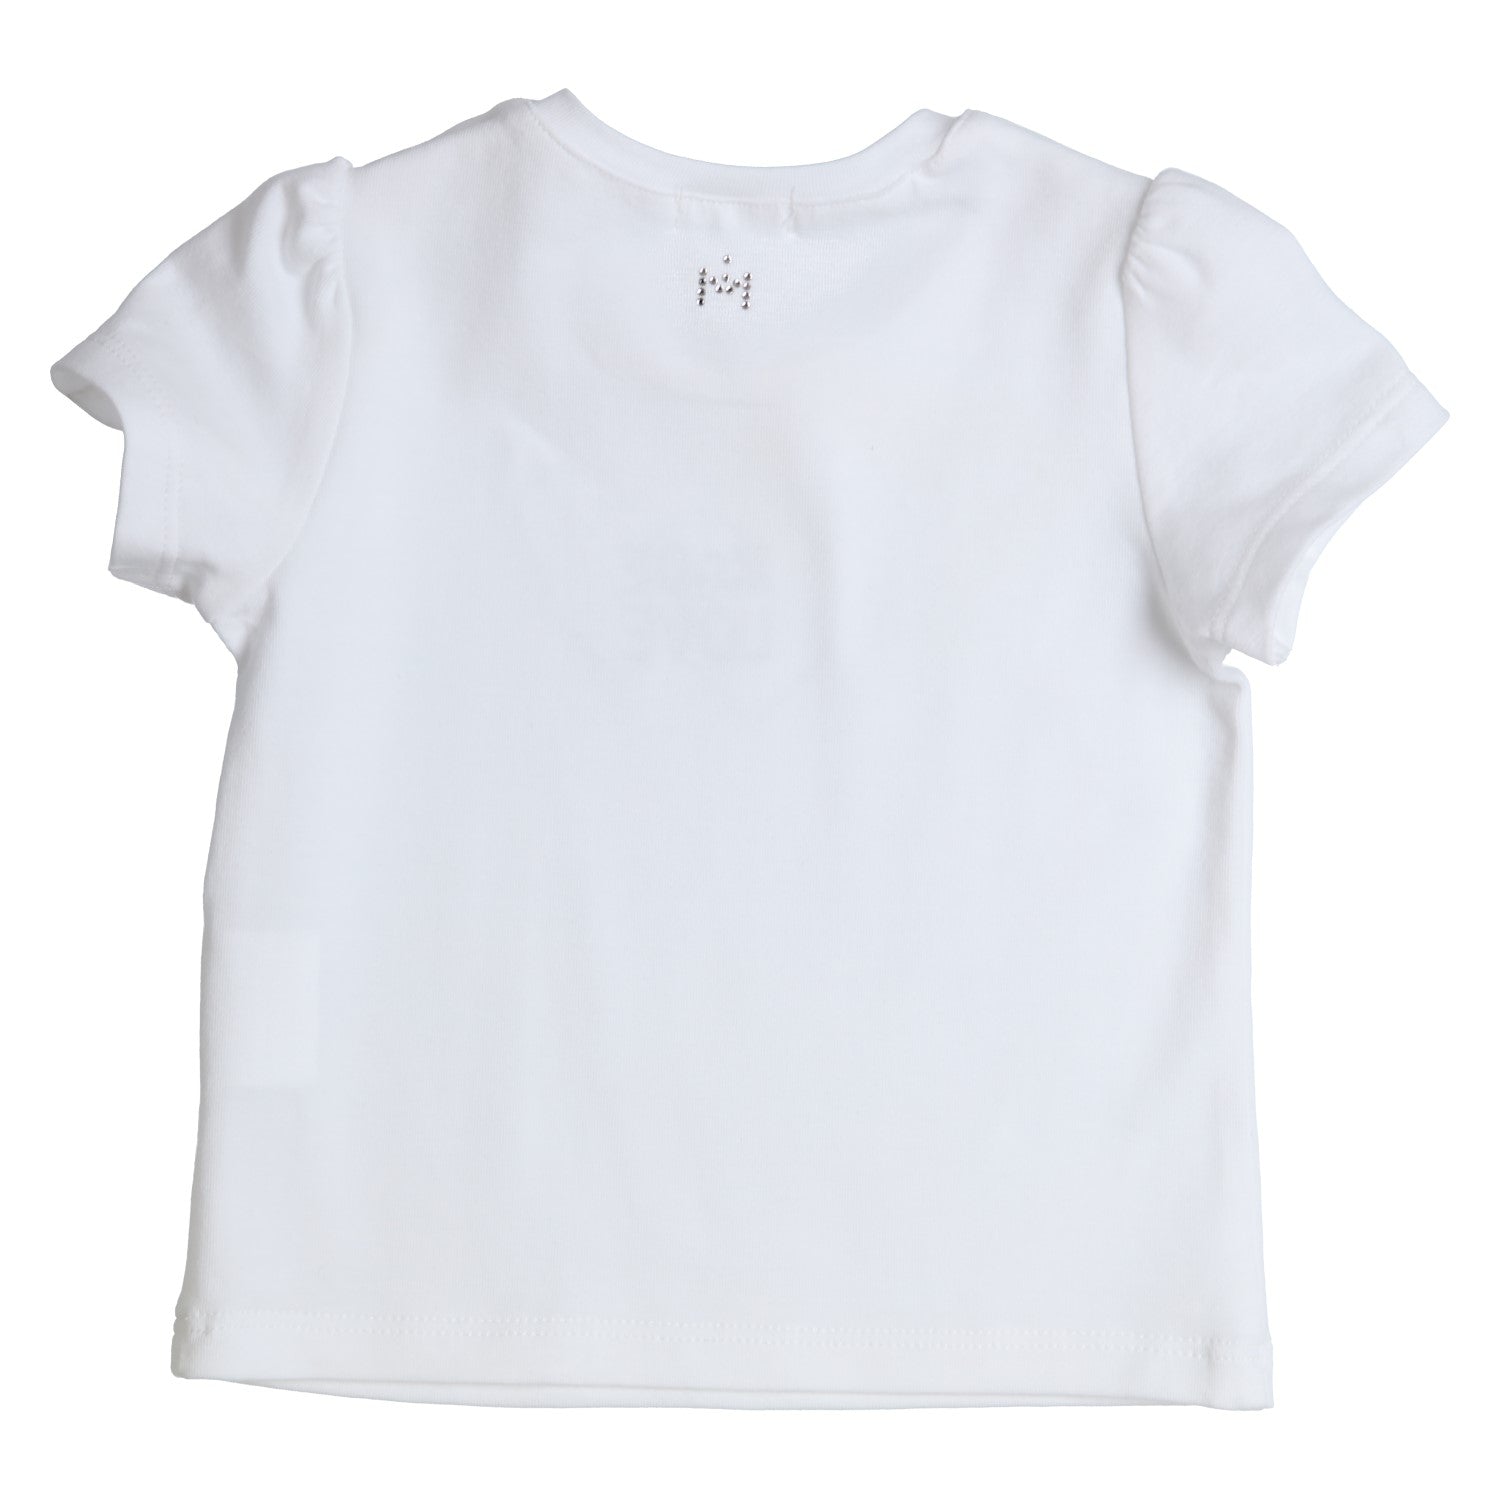 Girls Super Soft White "Made With Love" T Shirt - Nana B Baby & Childrenswear Boutique